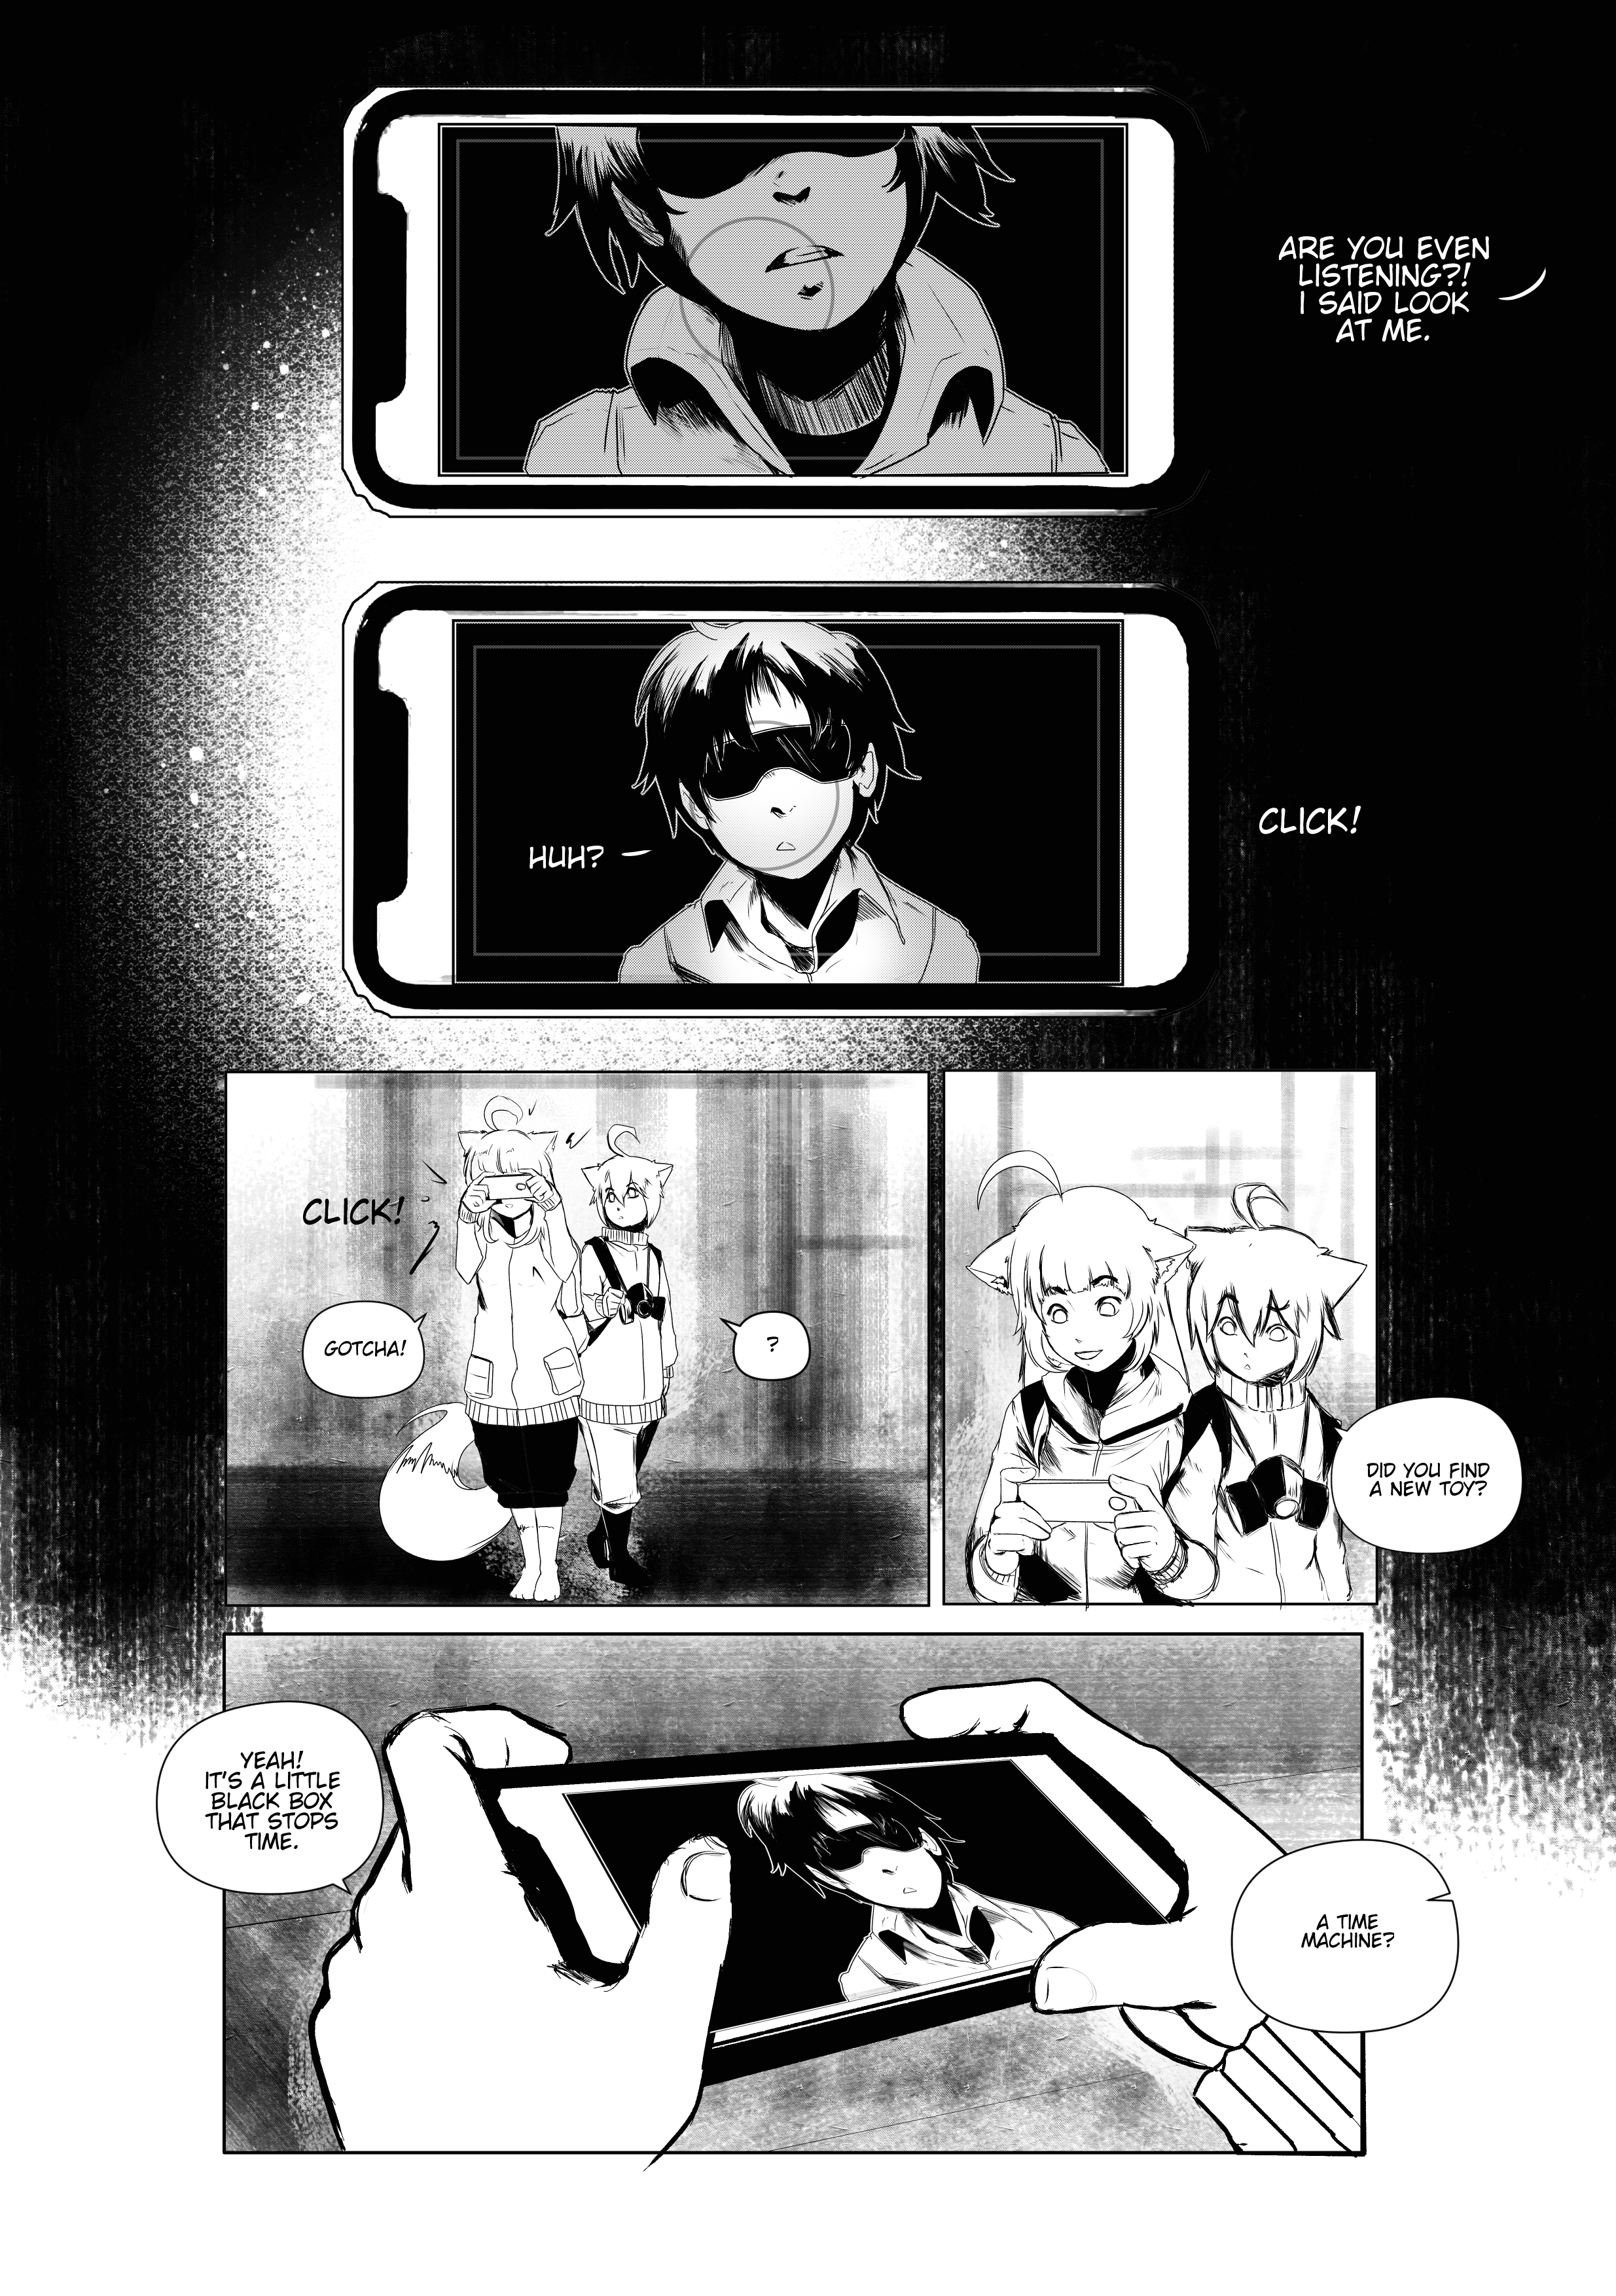 How We End - Page 4